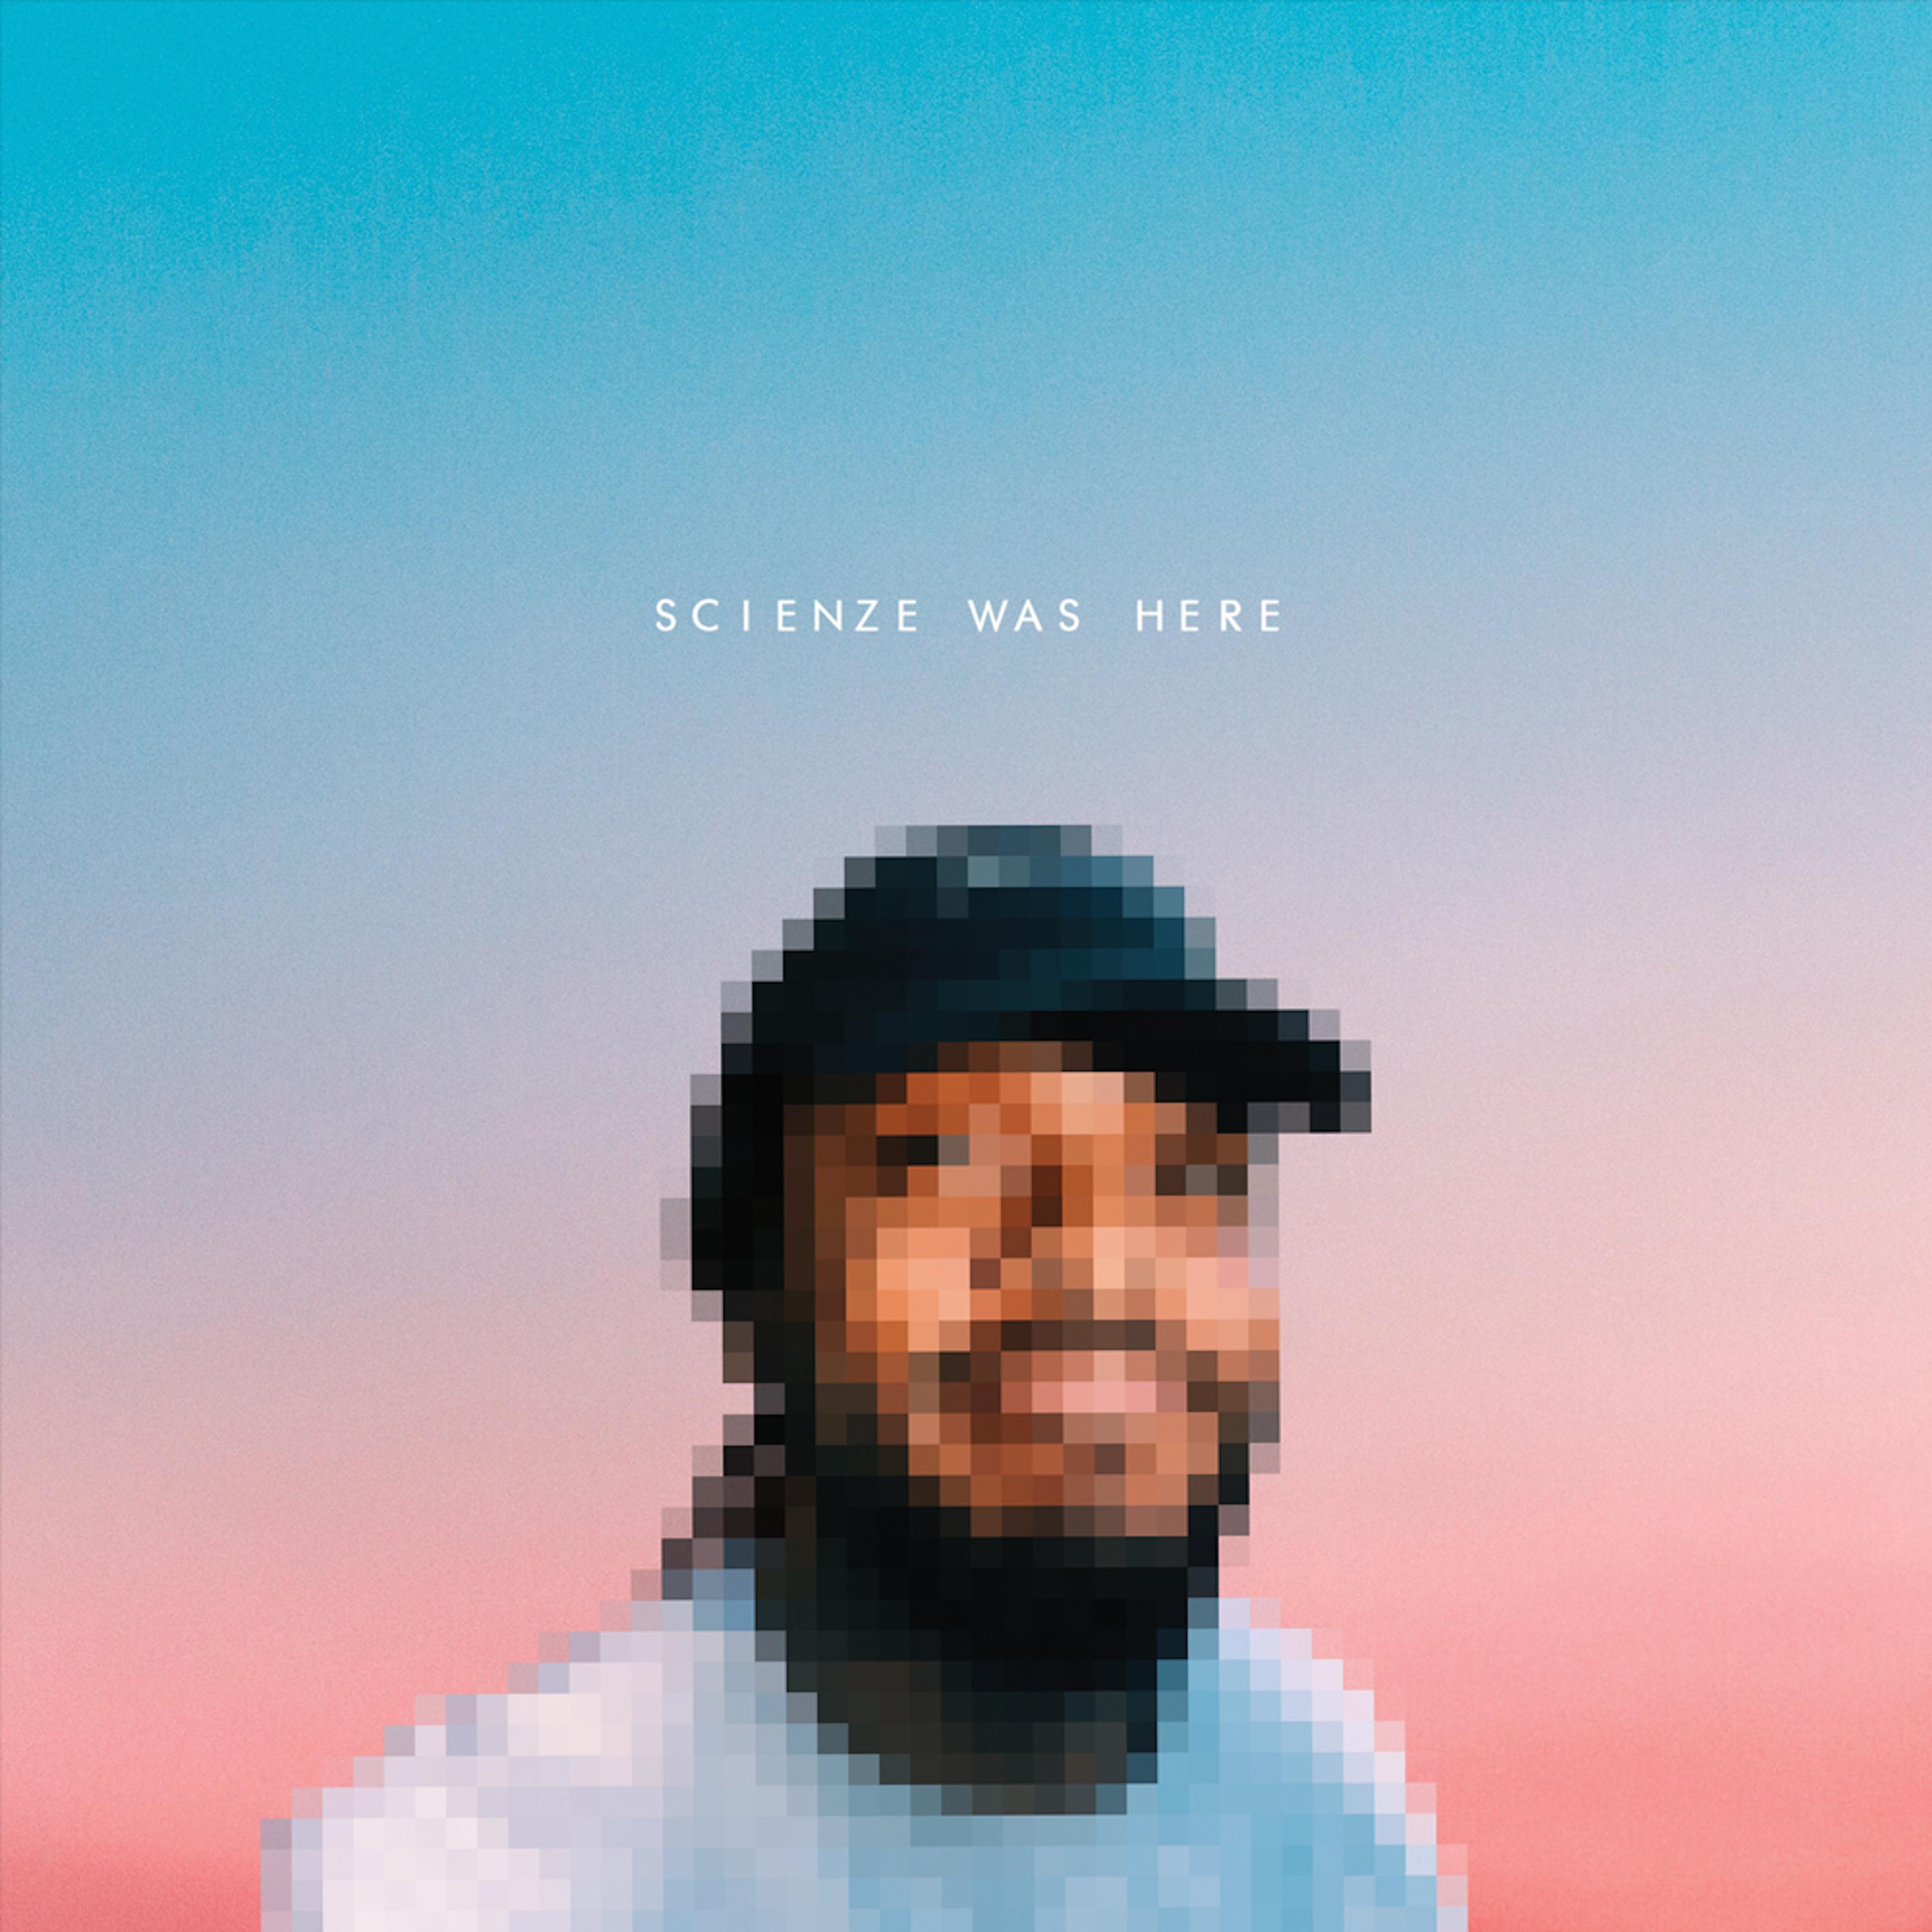 ScienZe - The Great Wave.